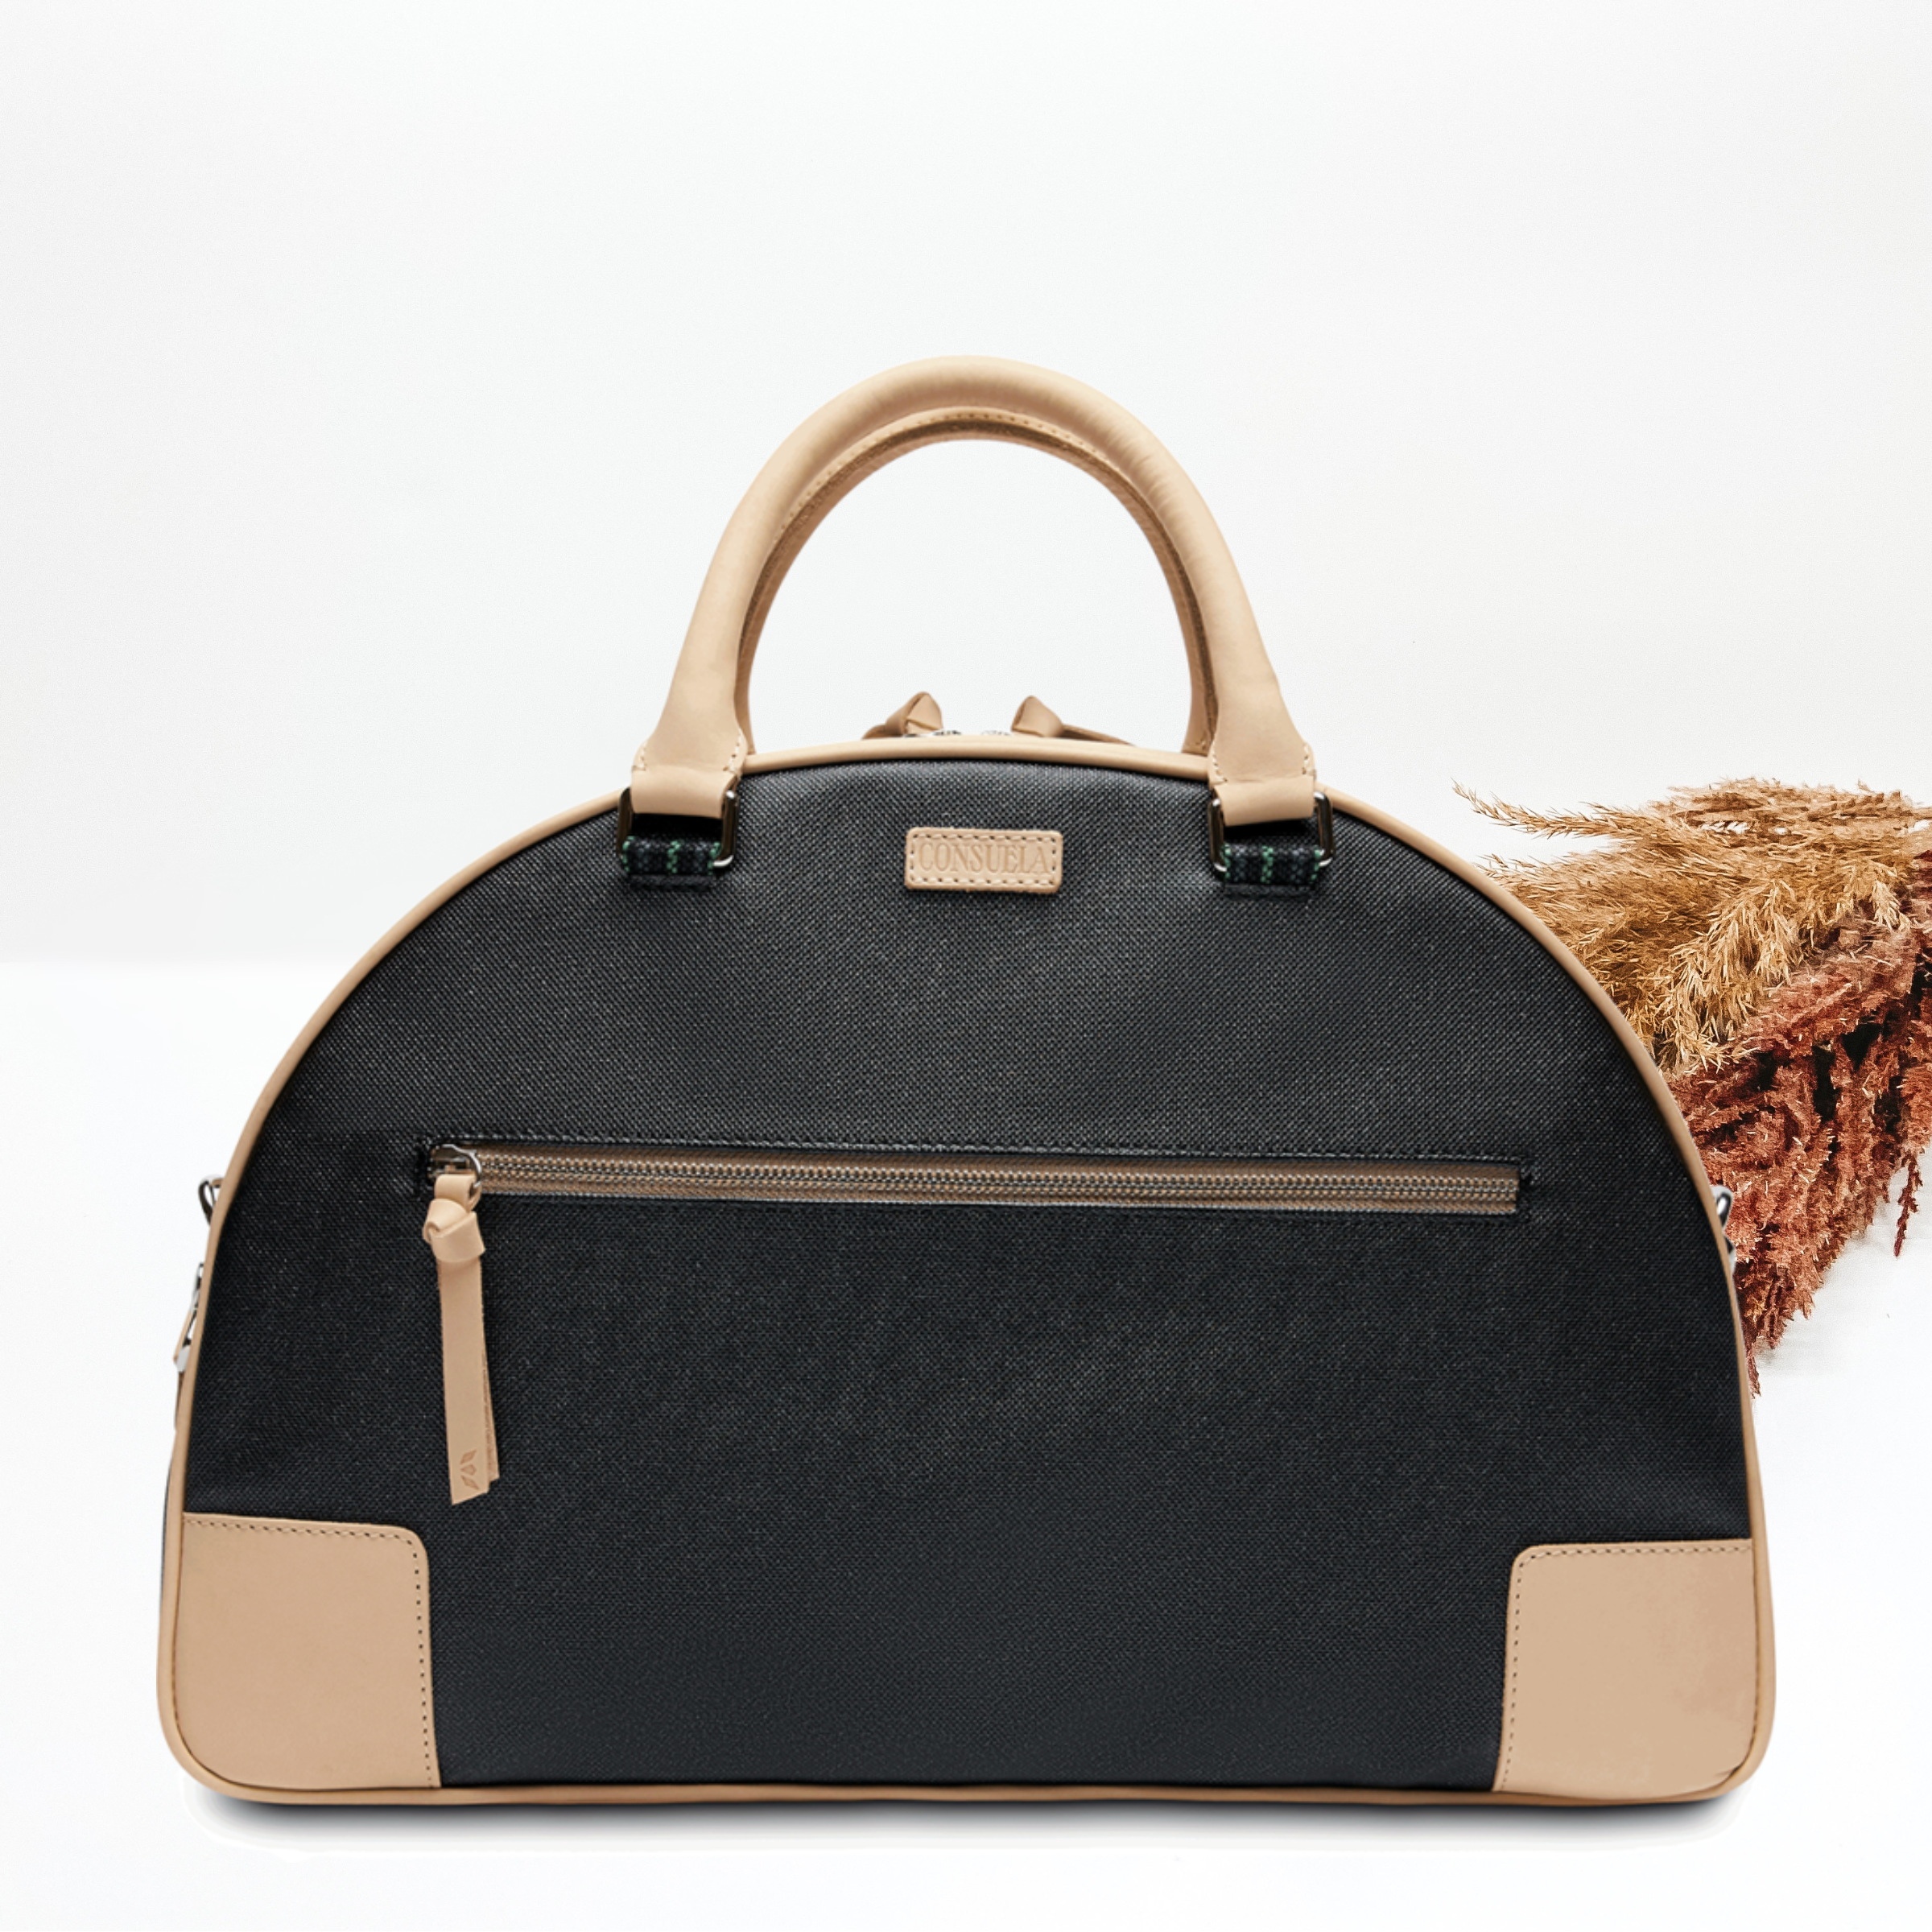 Consuela | Posh Commuter Bag - Giddy Up Glamour Boutique